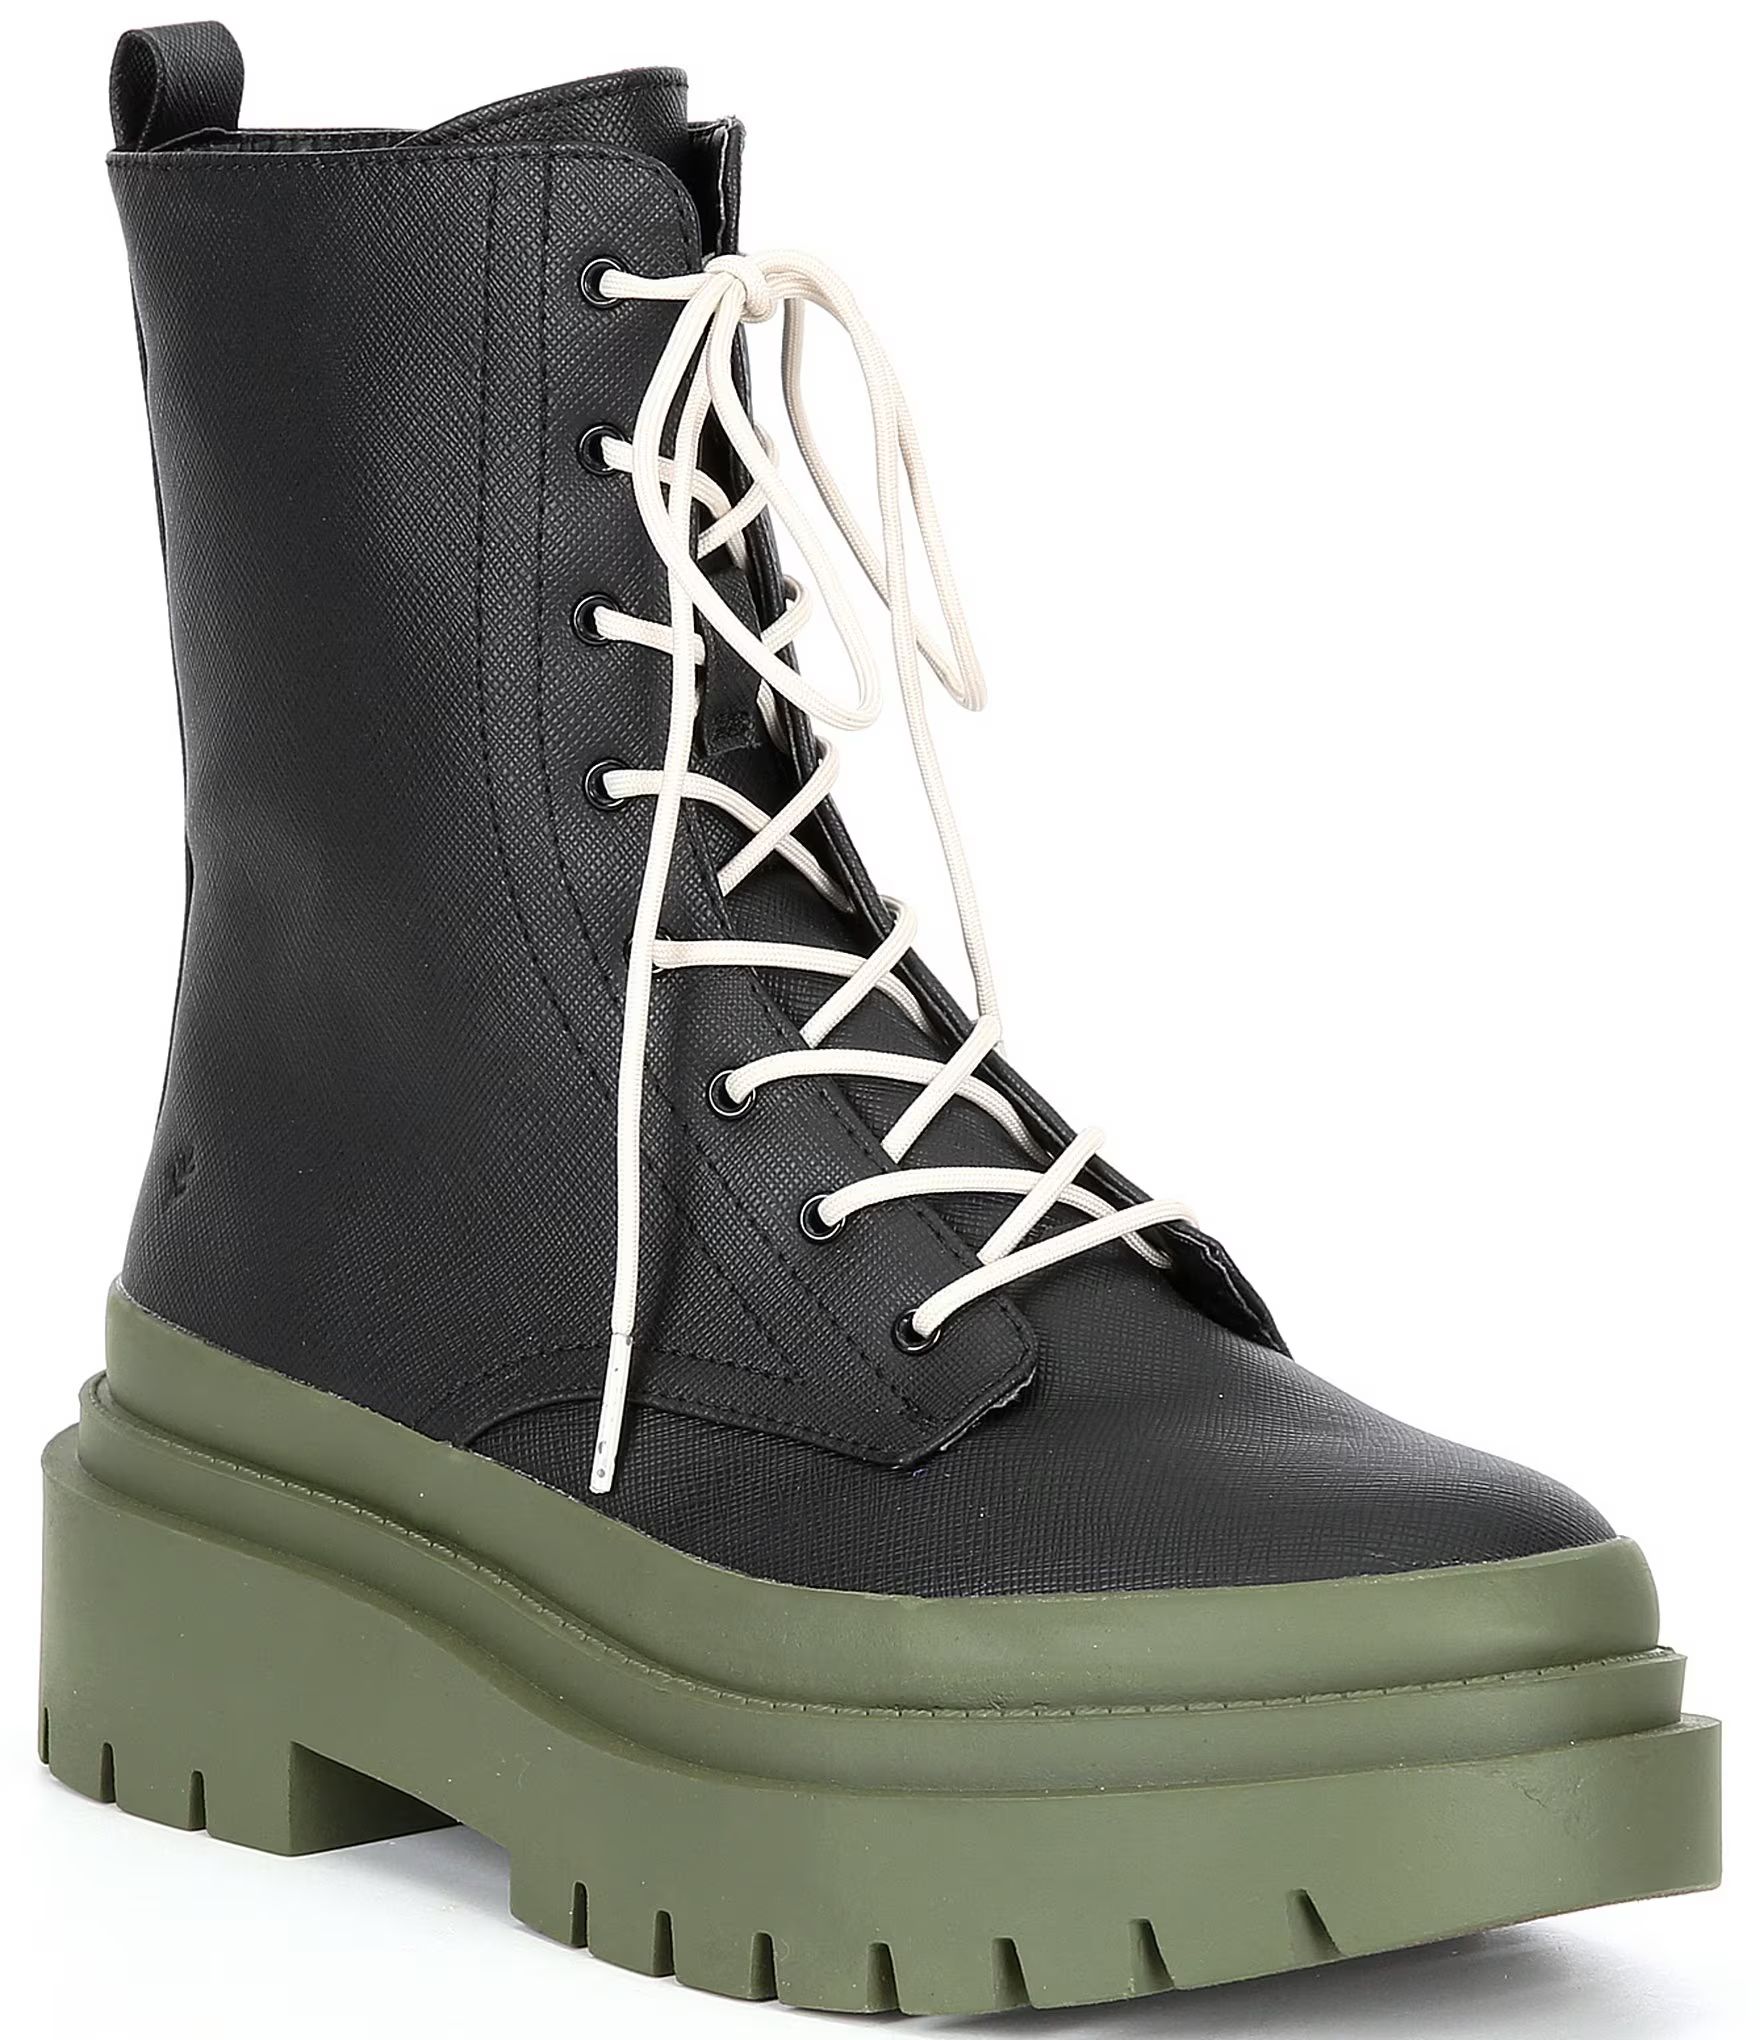 Cool Planet by Steve Madden Mosss Lace-Up Combat Booties | Dillards